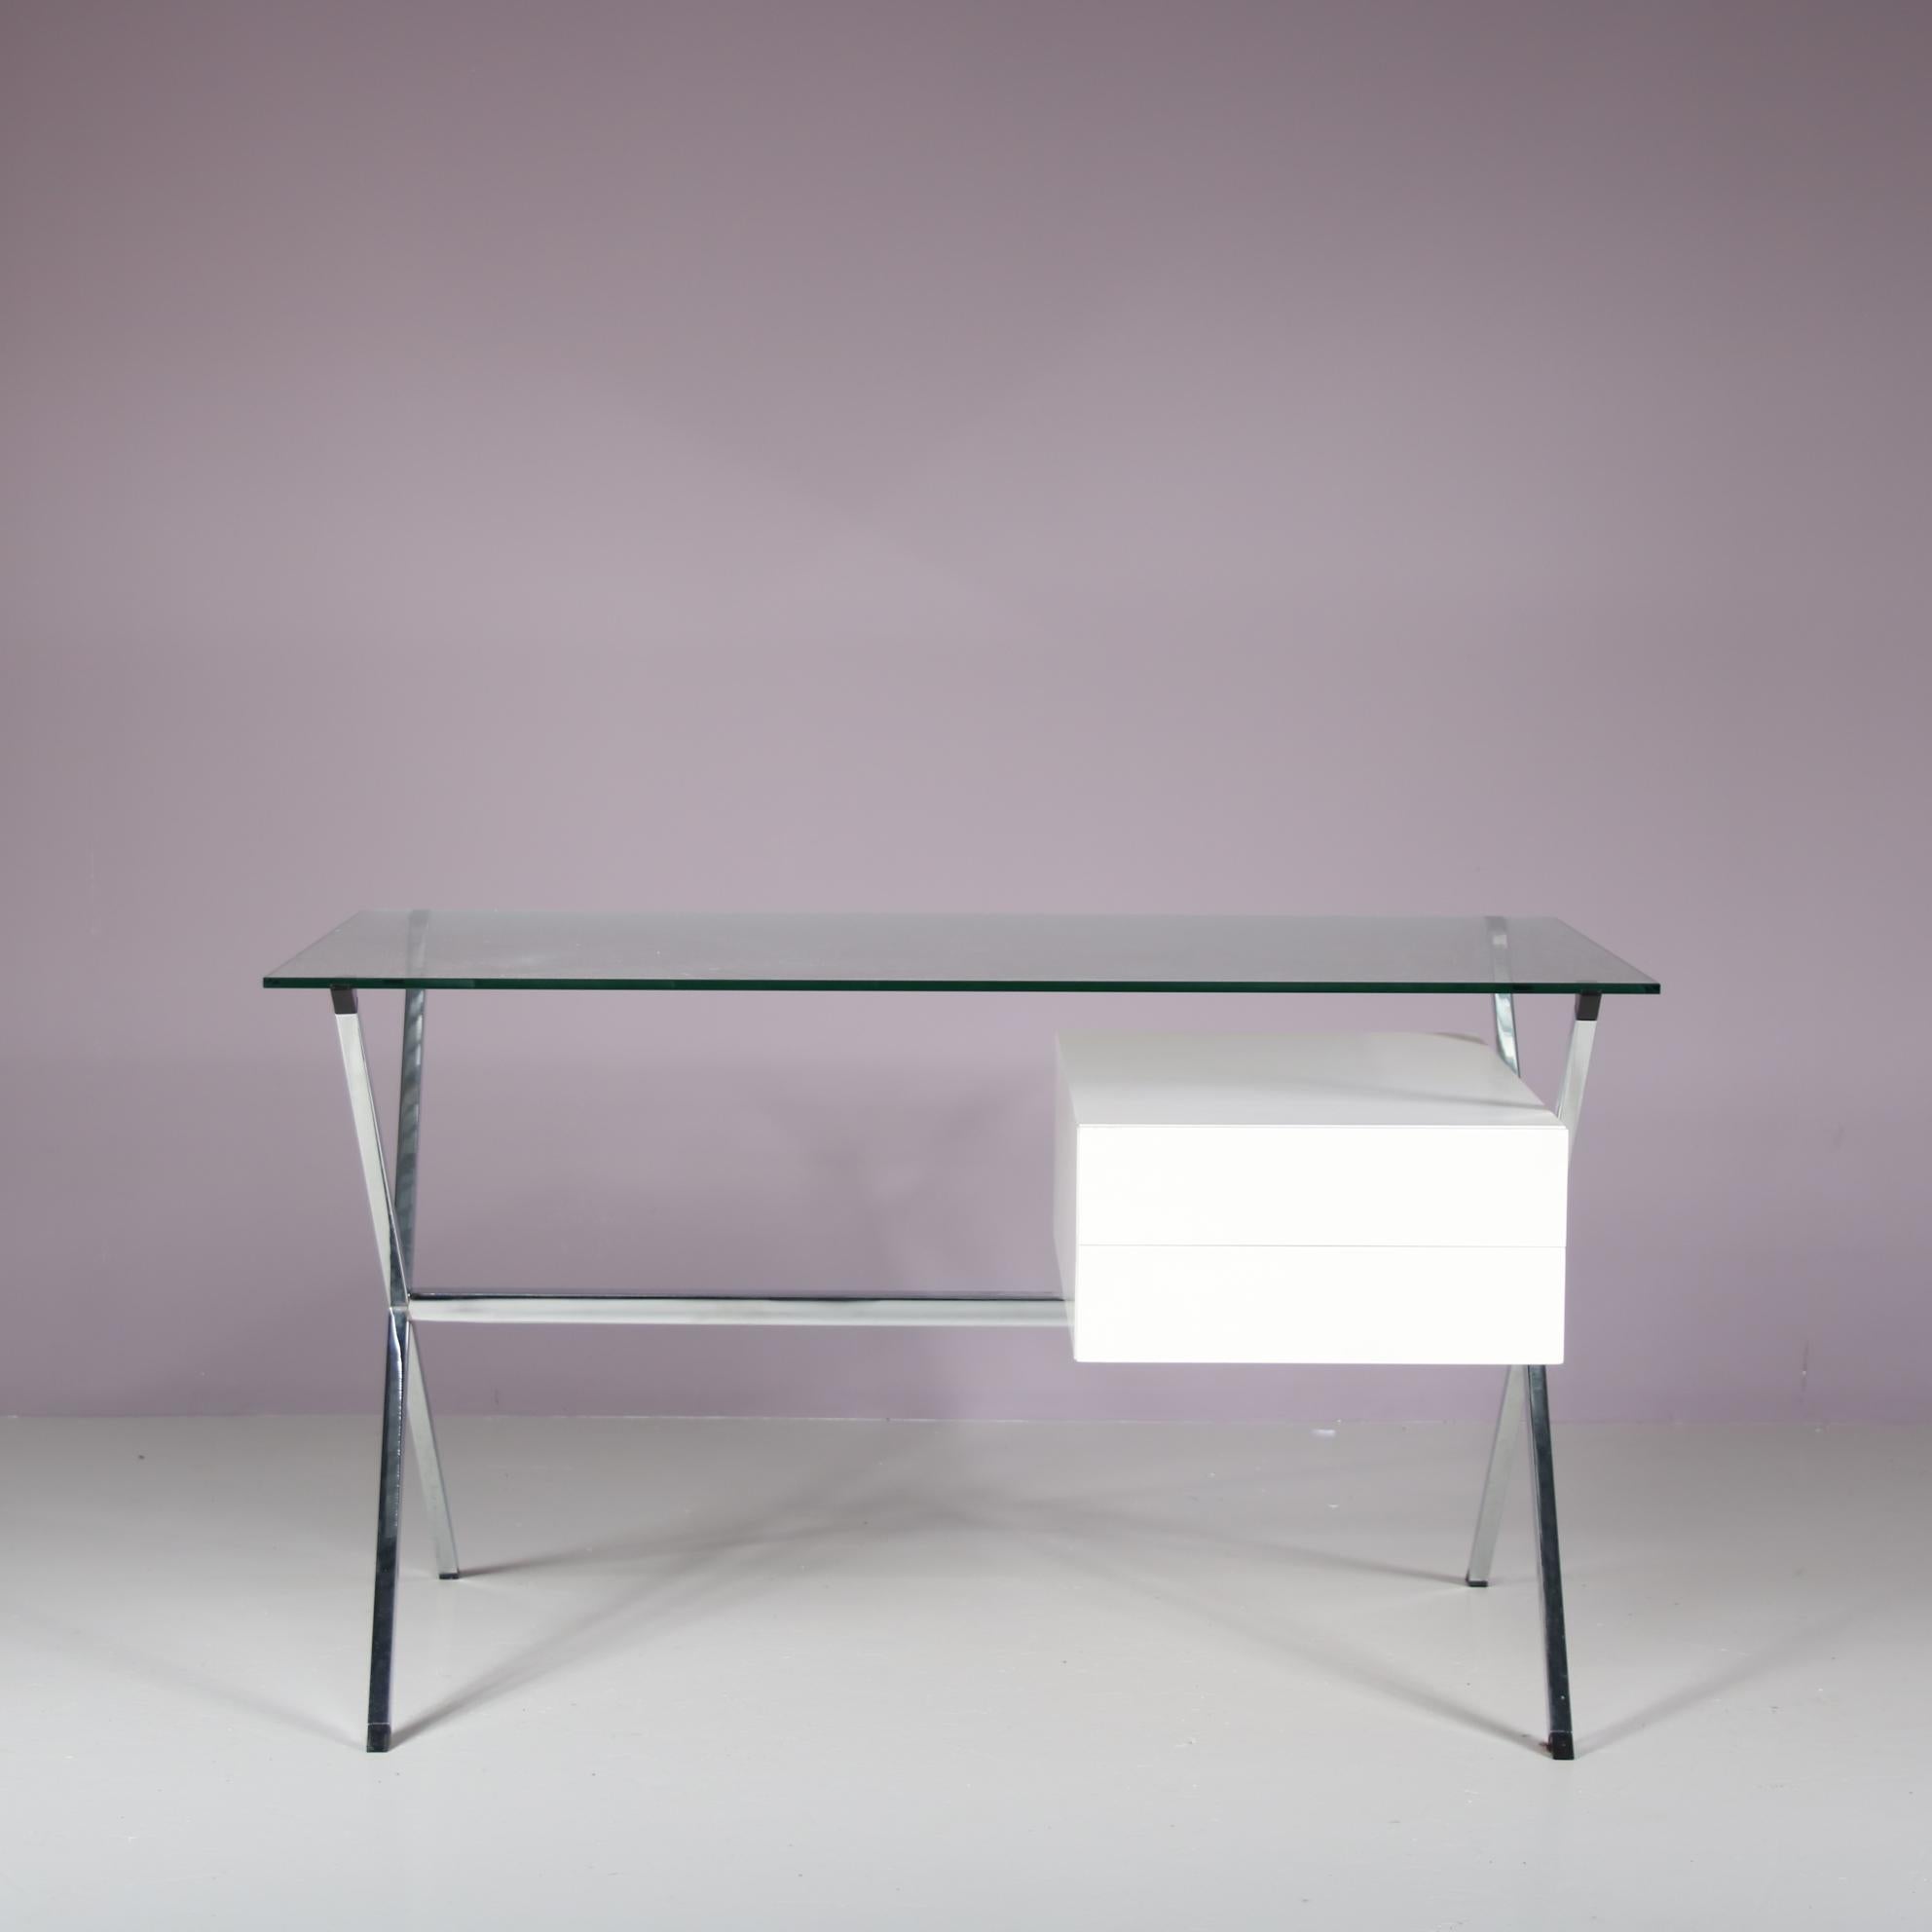 A wonderful desk designed by Franco Albini and manufactured by Knoll International in the USA around 1960.

The unique frame of the table has chrome plated crossed legs on each side with a support bar in between. All elegantly finished with a great